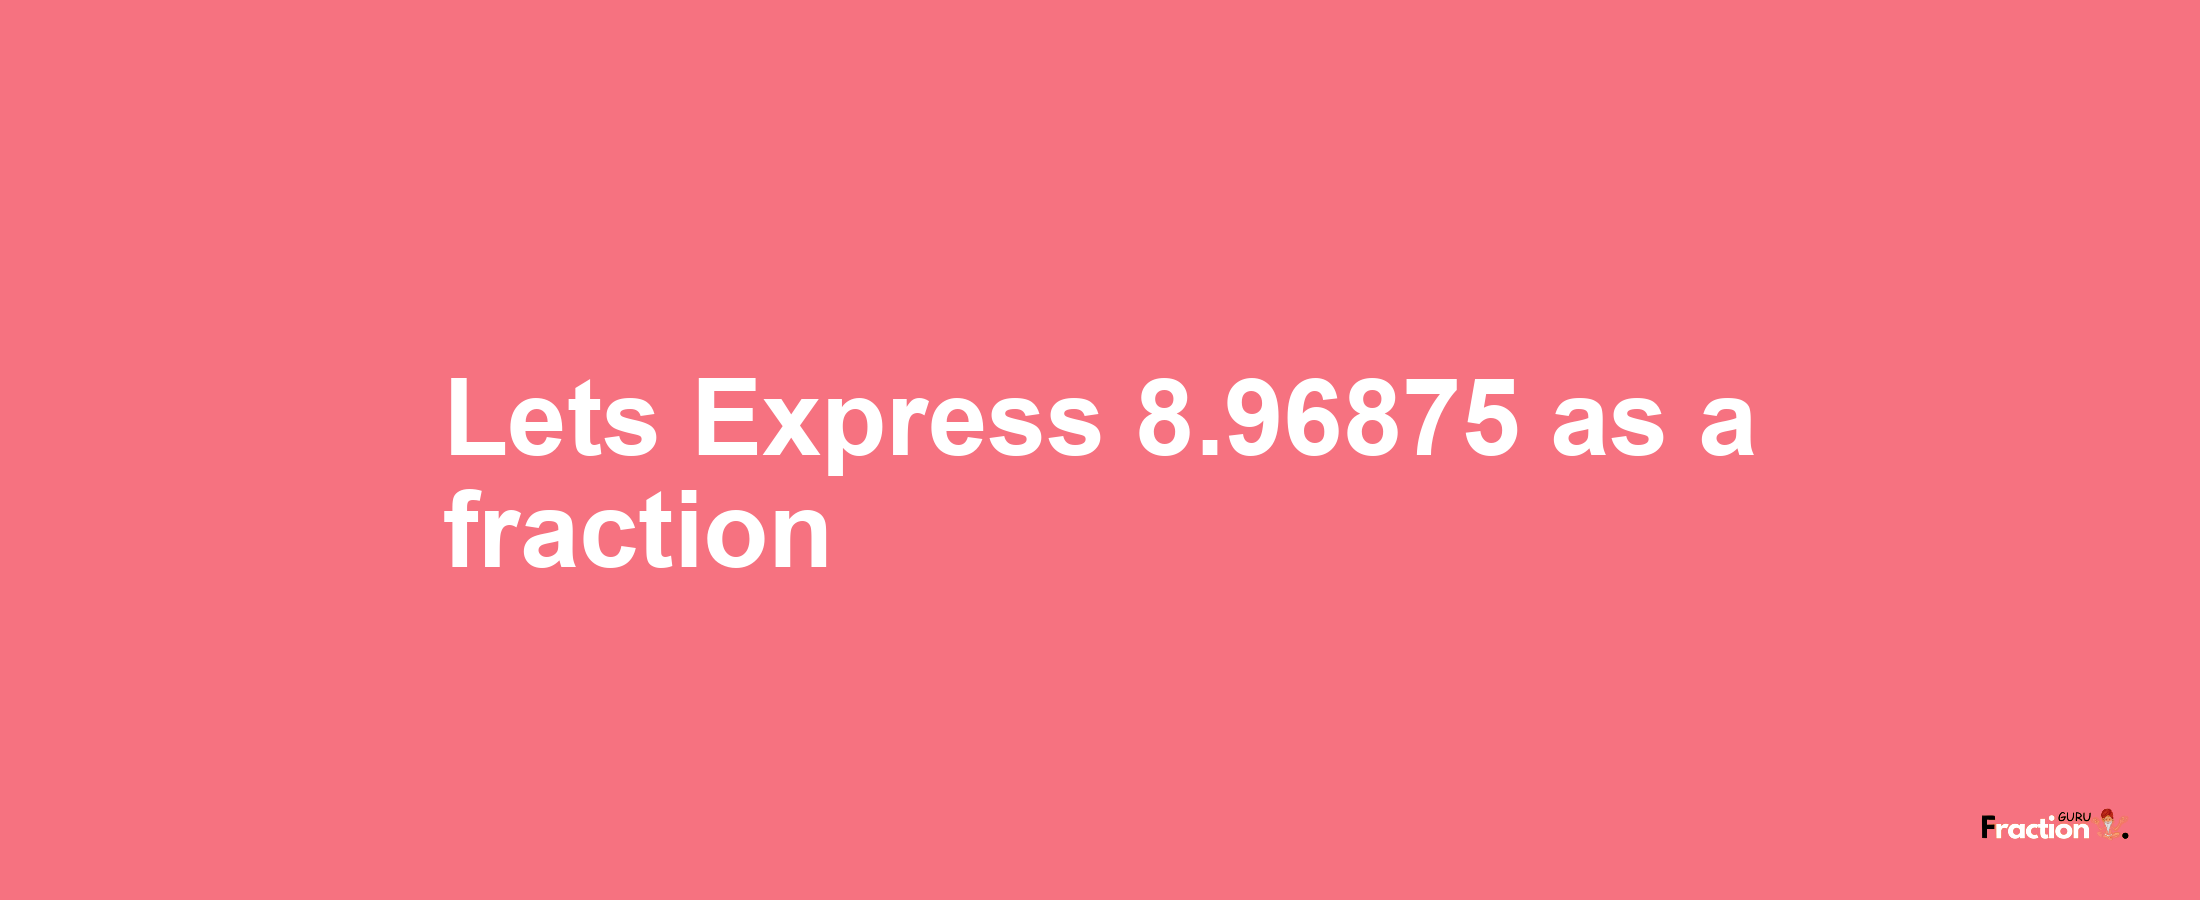 Lets Express 8.96875 as afraction